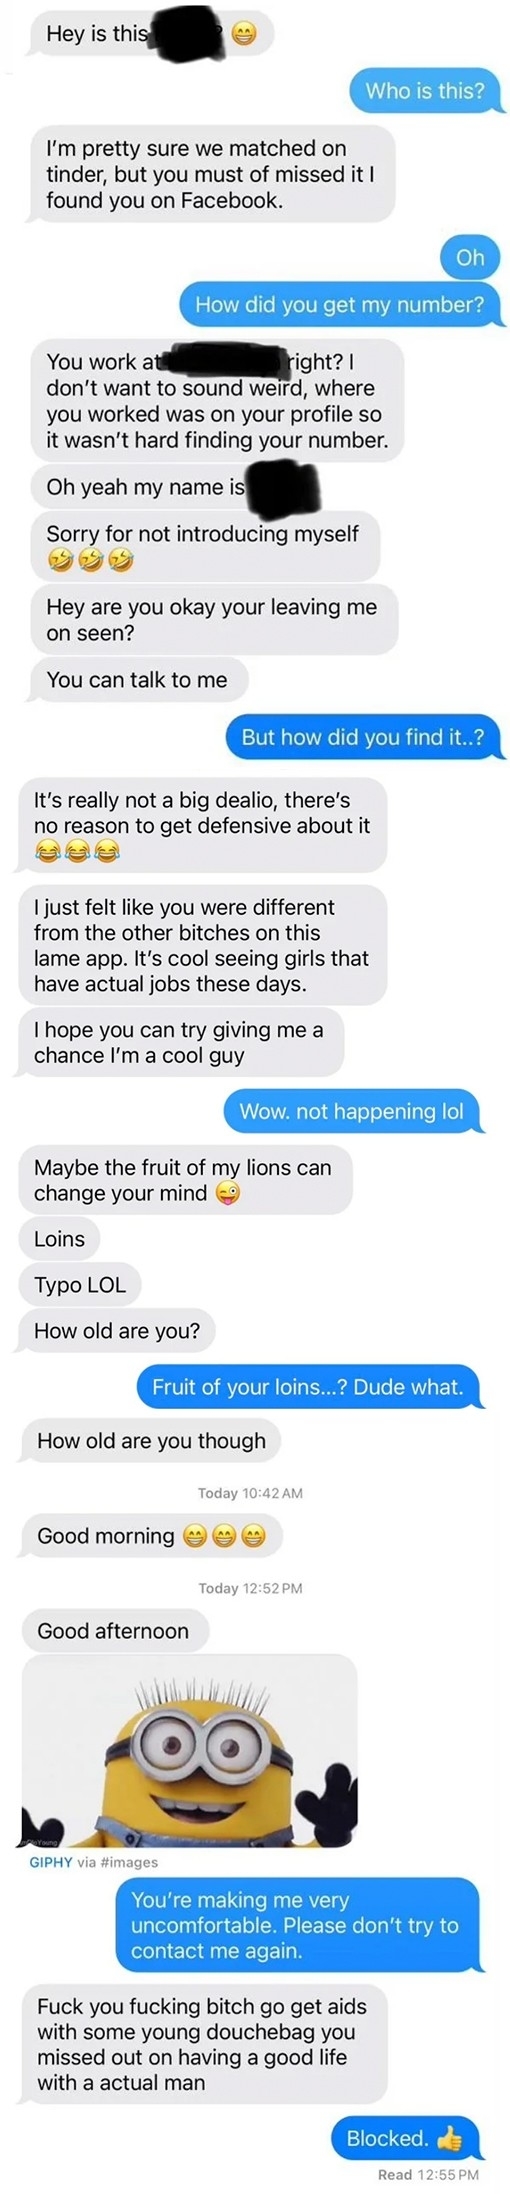 creepy messages from someone who claims to have found the other on a dating app, but won&#x27;t say where they got the other&#x27;s number